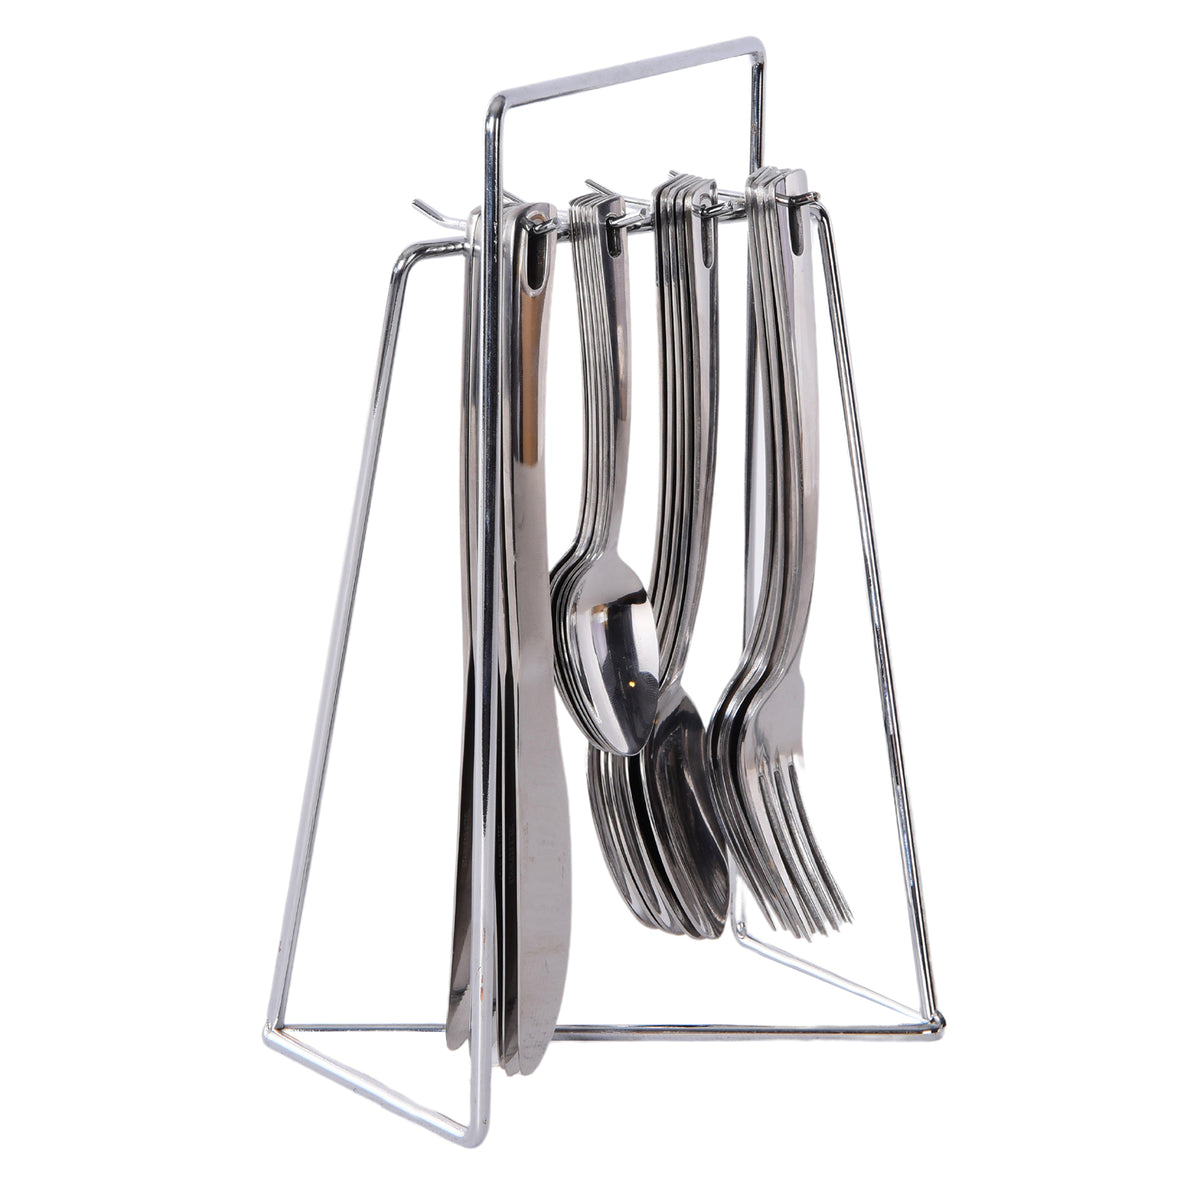 24 Pieces hanging cutlery set - silver